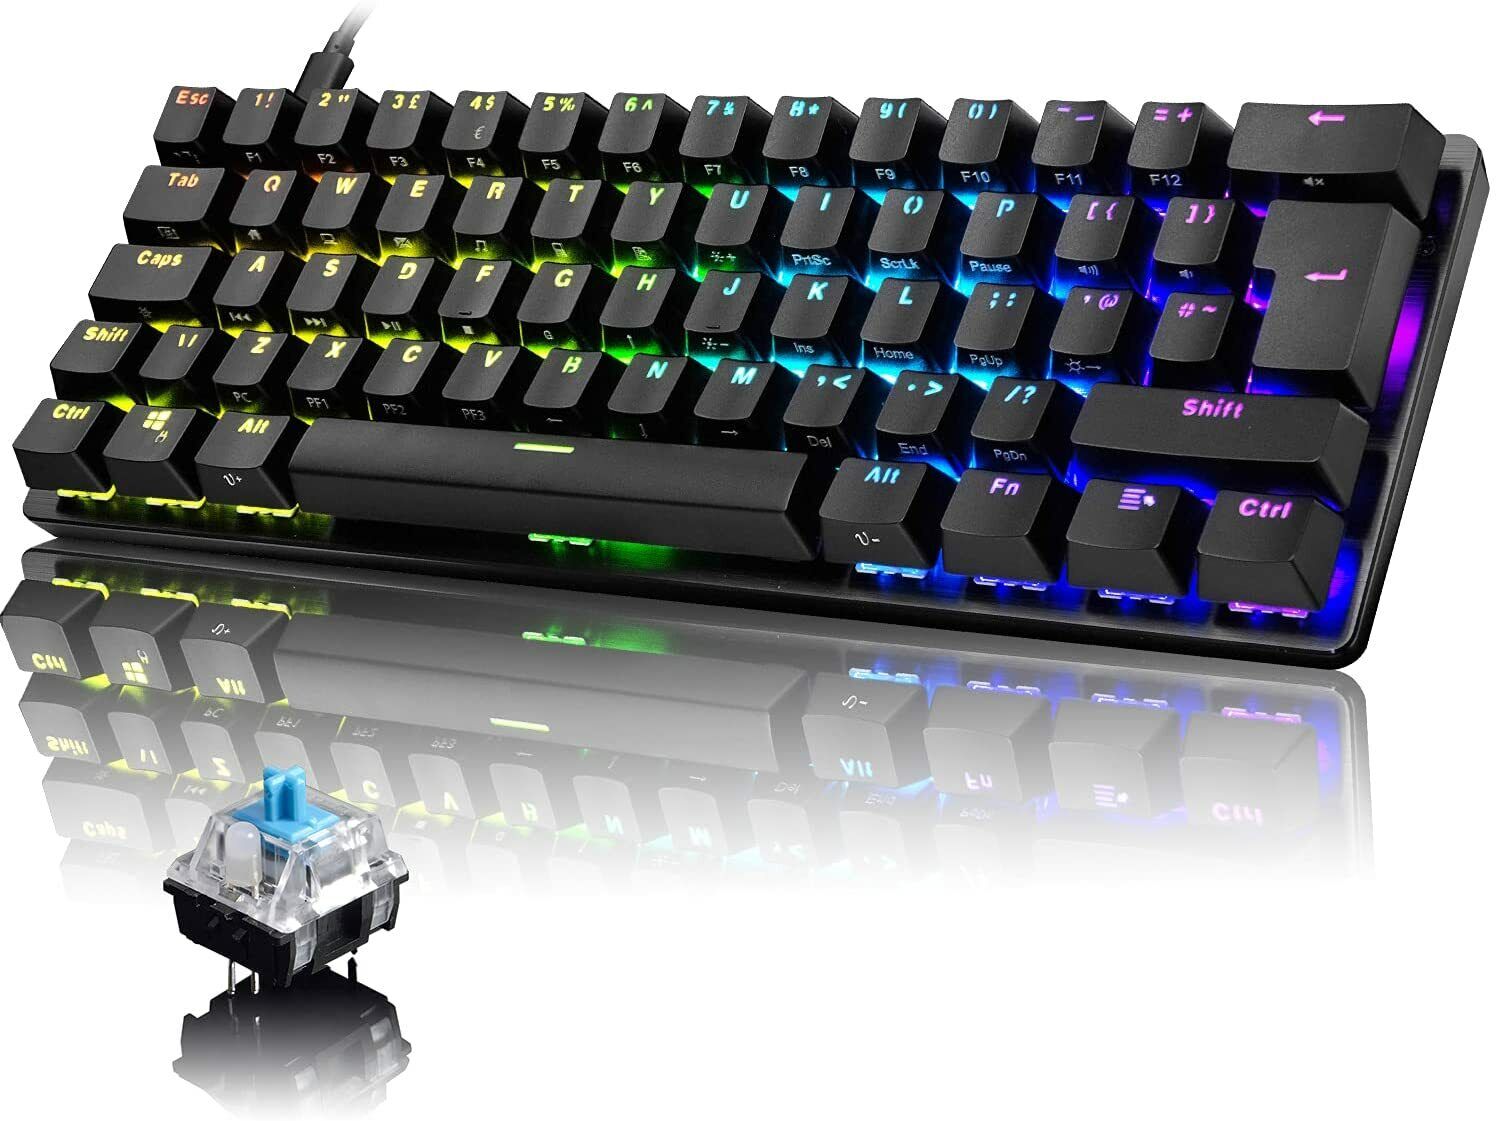 TK61 Wired 60% Mechanical Gaming Keyboard RGB Backlit Ultra-Compact For PC PS4